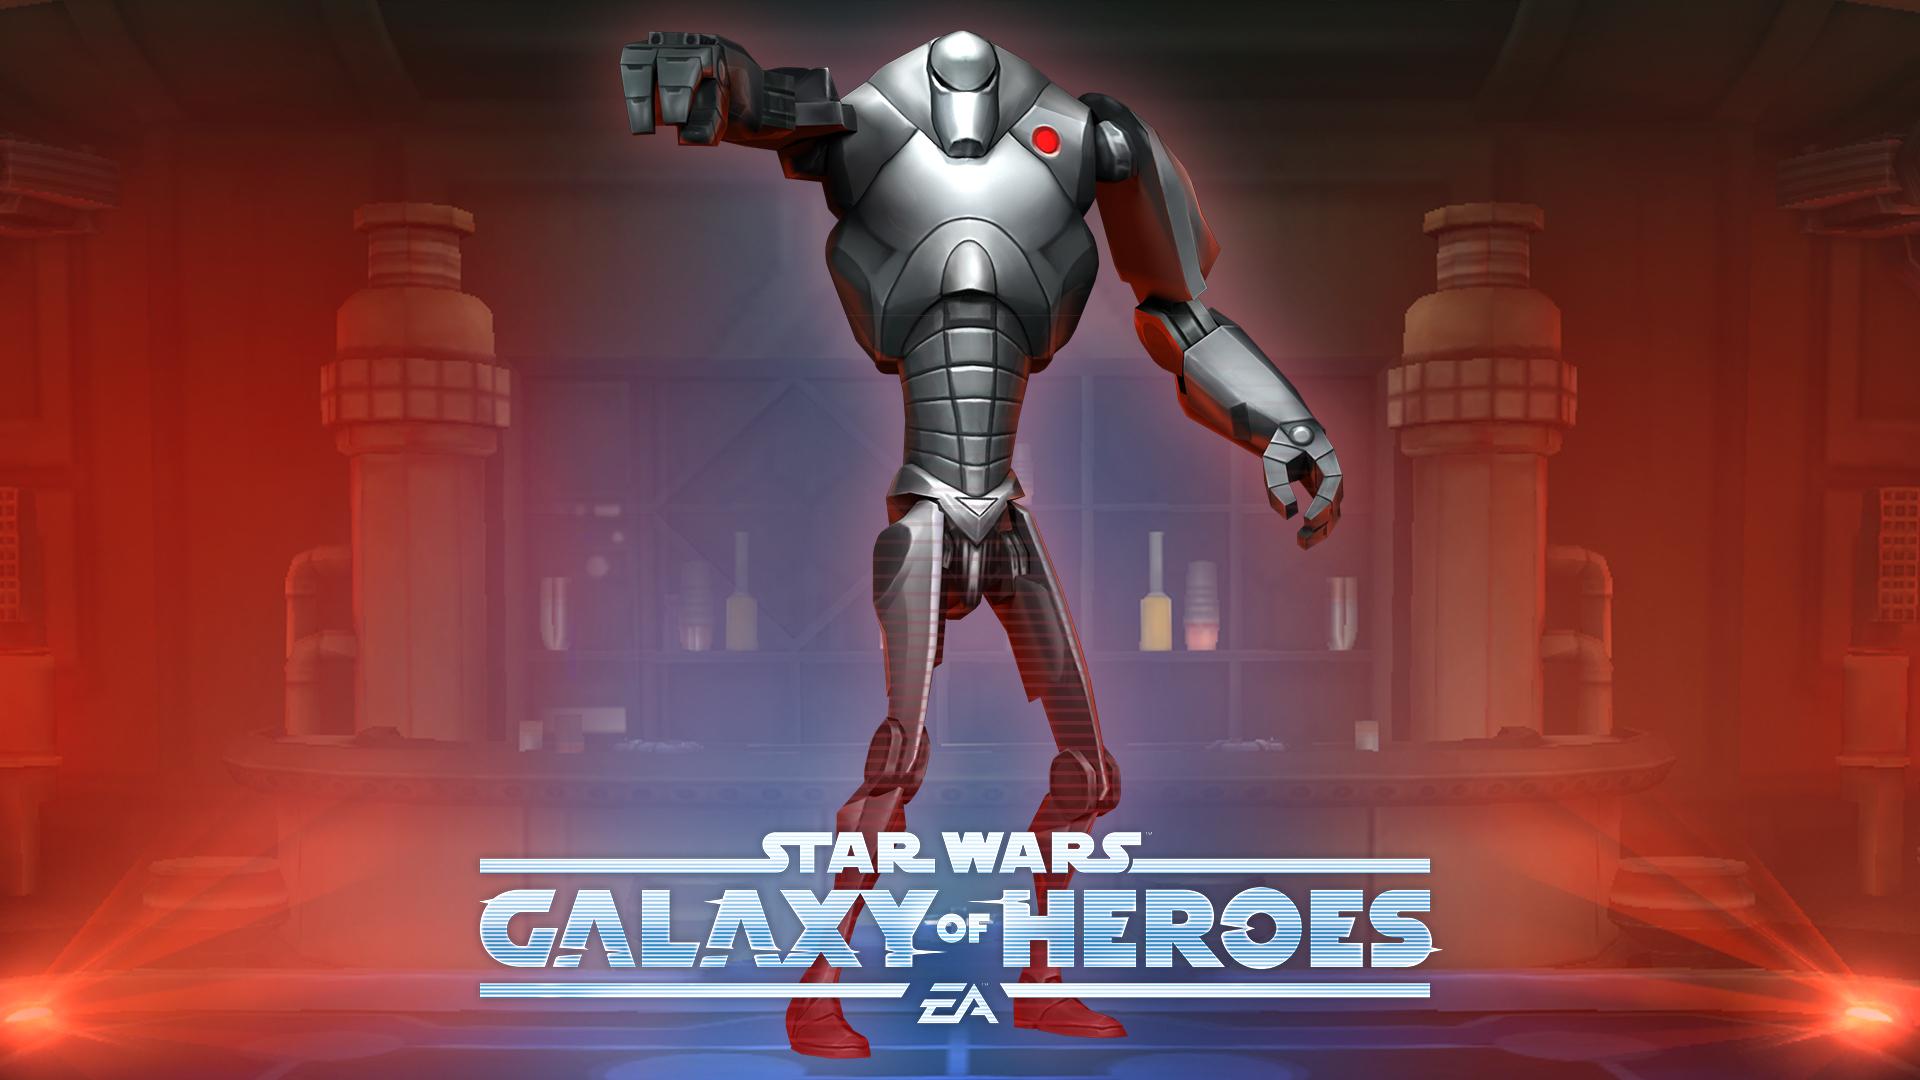 EA Star Wars B2 Super Battle Droid is a tank who punishes enemies that evade or damage its allies in #StarWarsGalaxyofHeroes